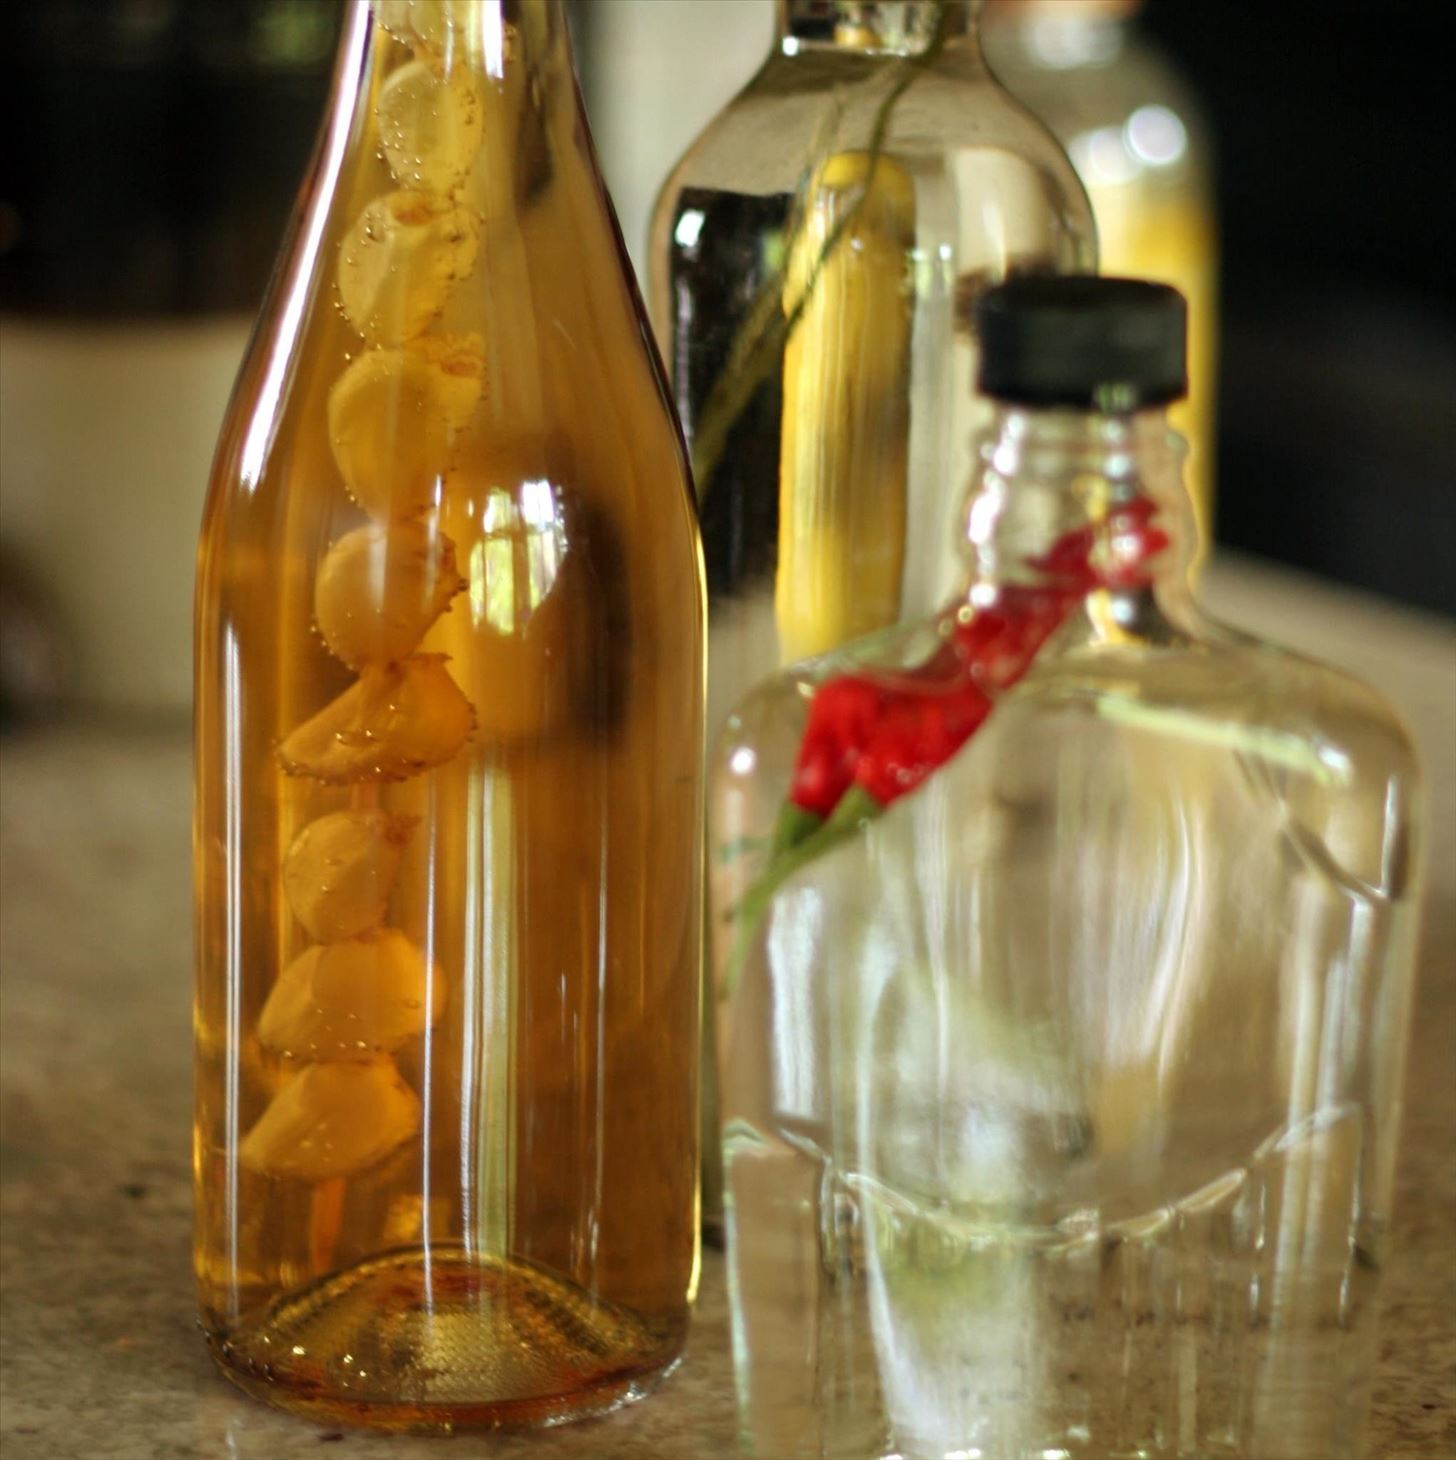 How to Make Garlic-Infused Olive Oil & Vinegar at Home « Food